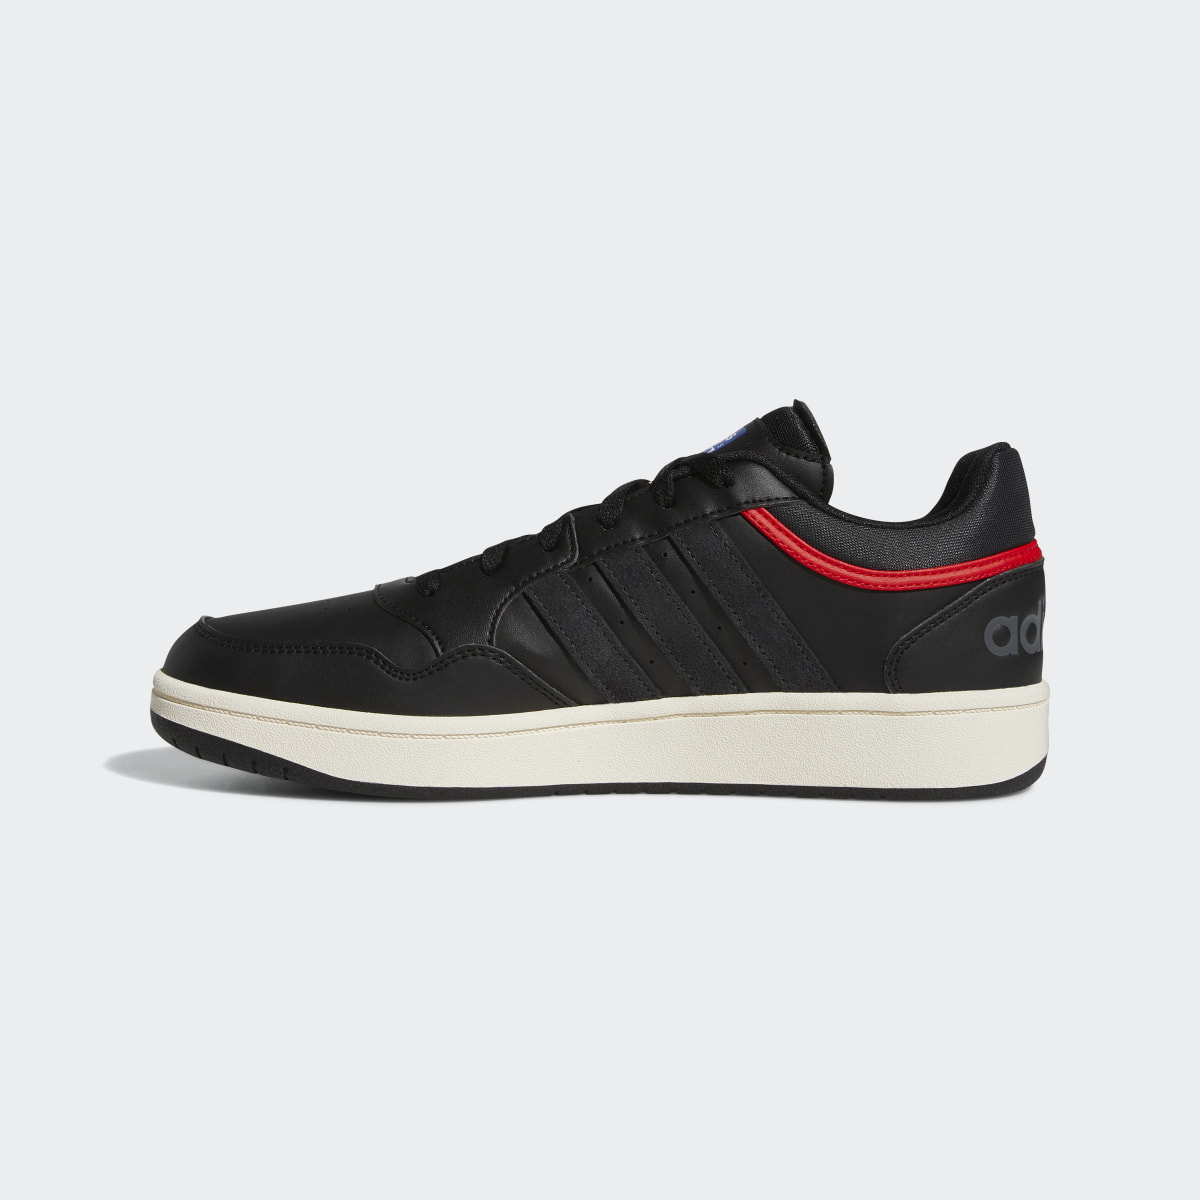 Adidas Hoops 3.0 Low Classic Vintage Schuh. 7